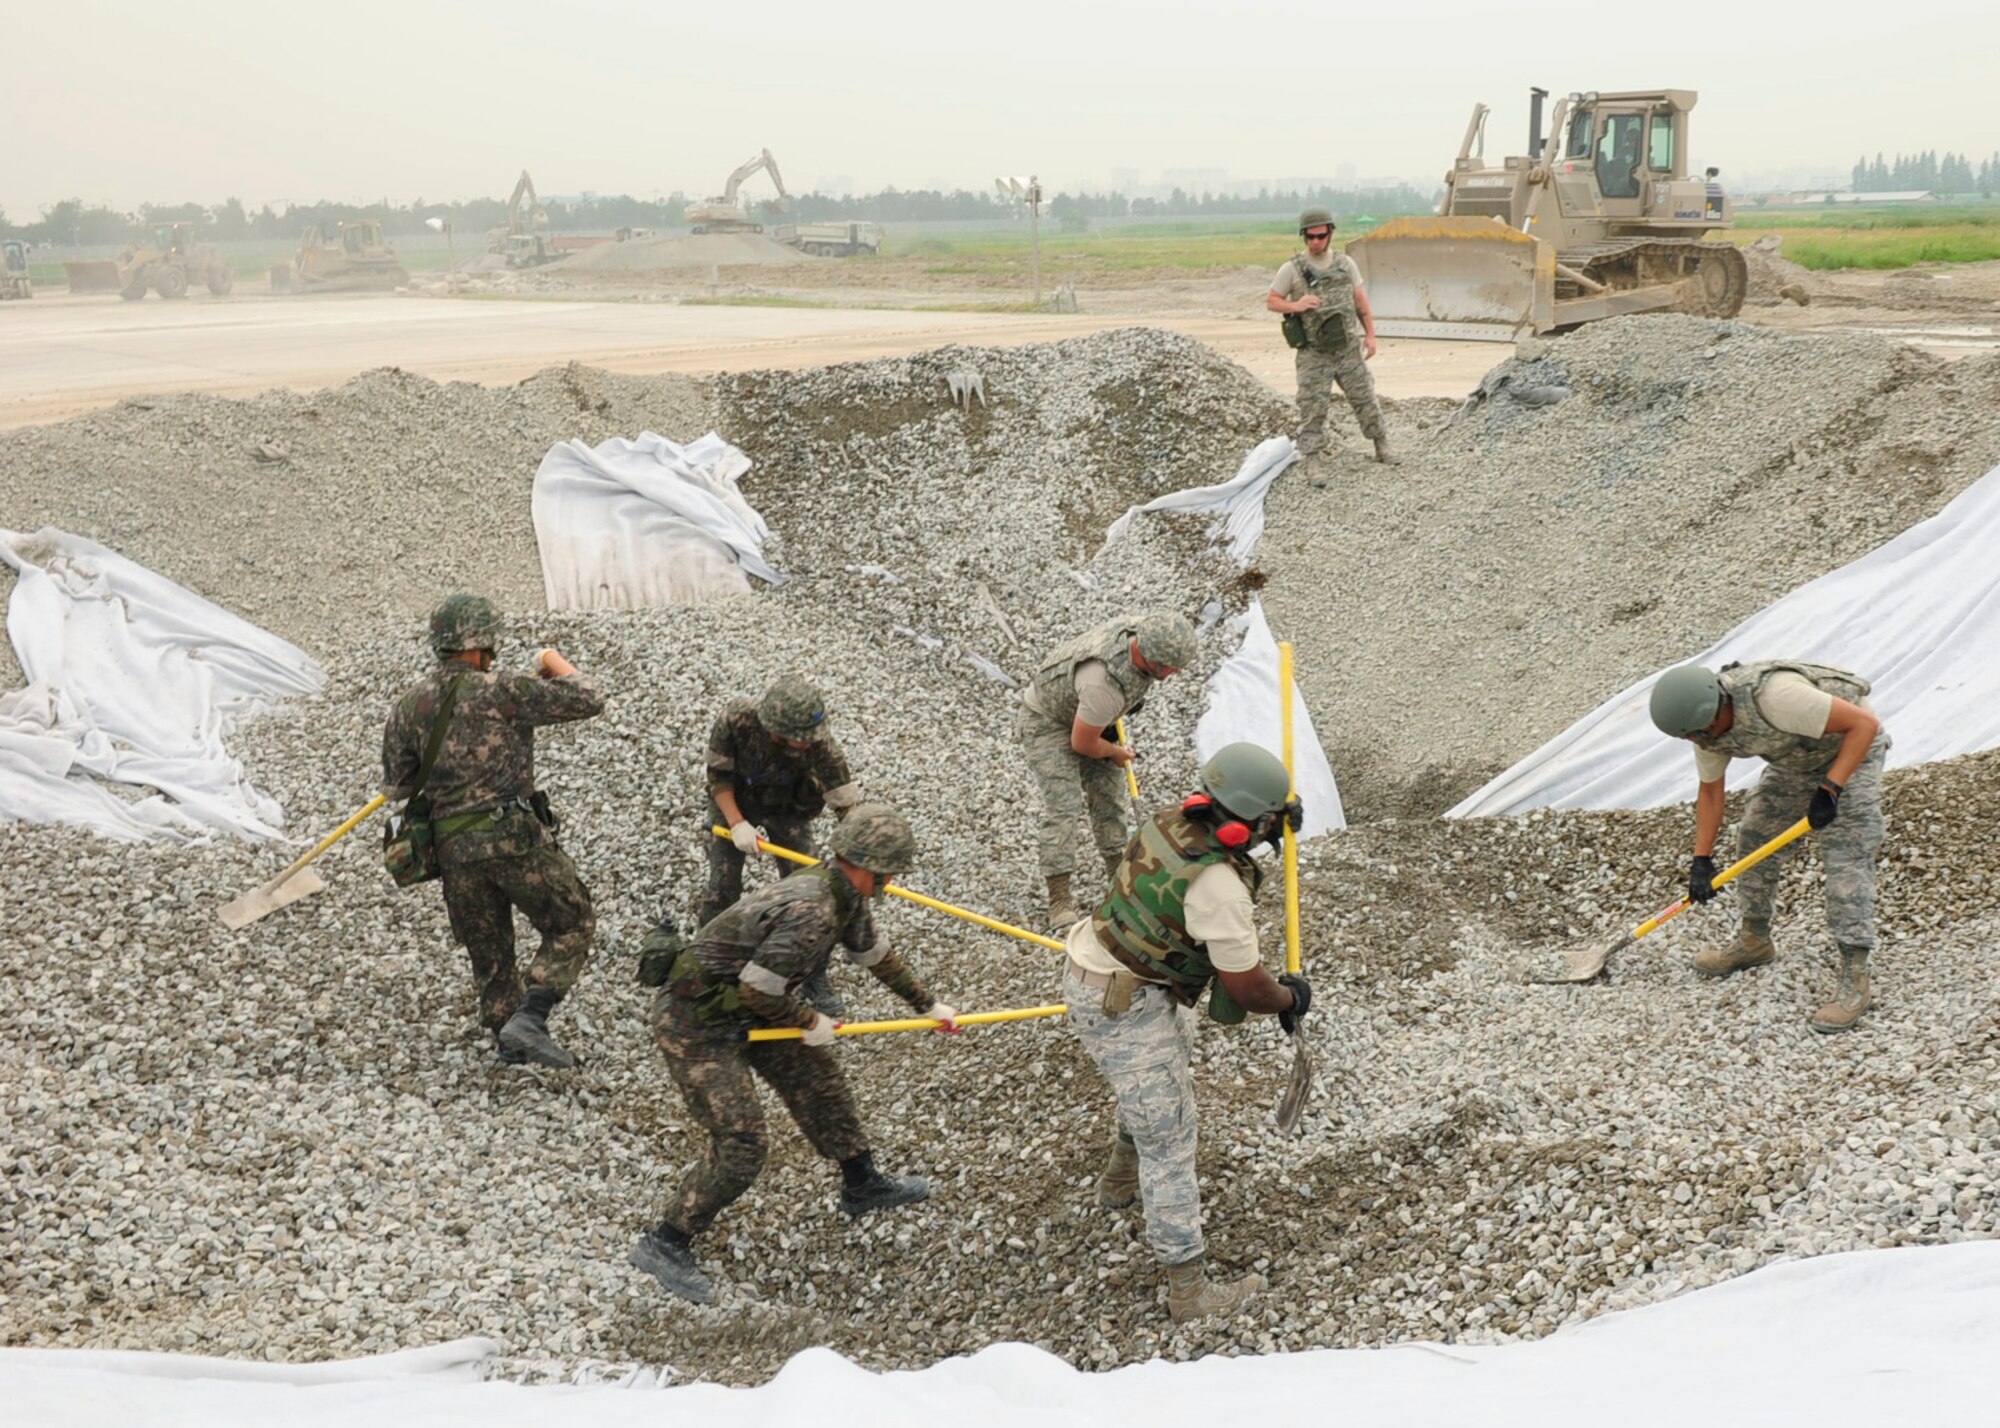 Airmen assigned to Pacific Air Forces bases excavate and refill a crater on the airfield at Gwangju Air Base during an Airfield Damage Repair bilateral training scenario on June 1, 2016. The training is part of Pacific Unity, a bilateral training exercise designed to enhance interoperability and build partnership capacity in the Indo-Asia Pacific region. (U.S. Air Force photo/Staff Sgt. Chelsea Browning)